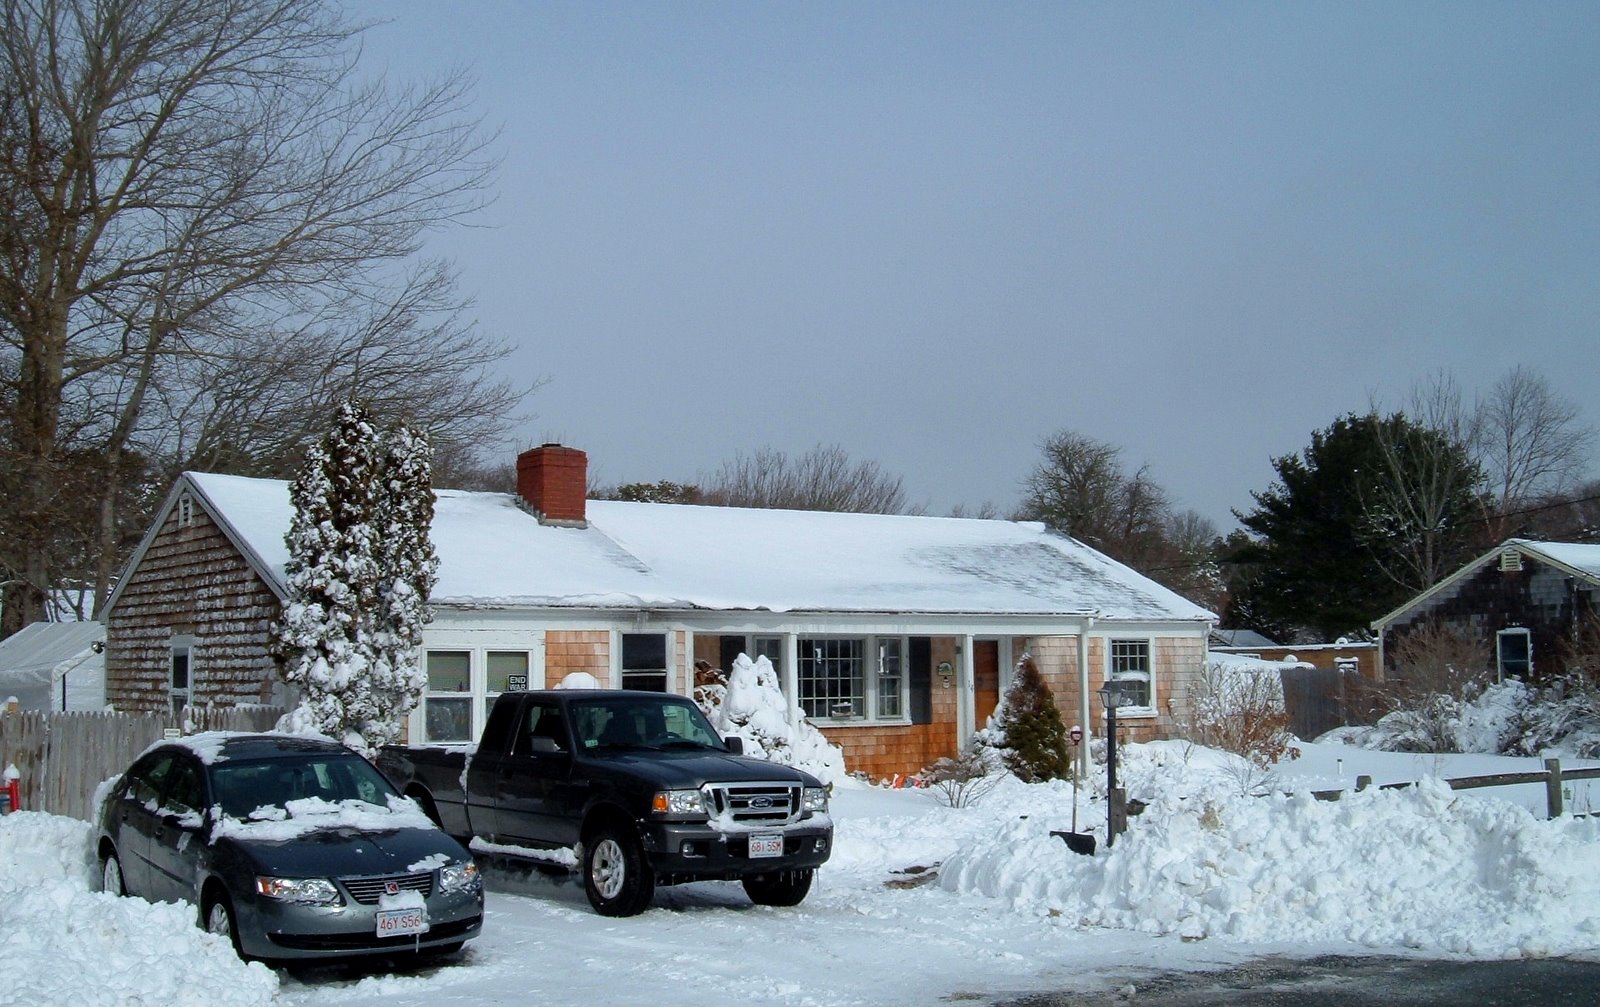 [Our+House+in+the+Snow.jpg]